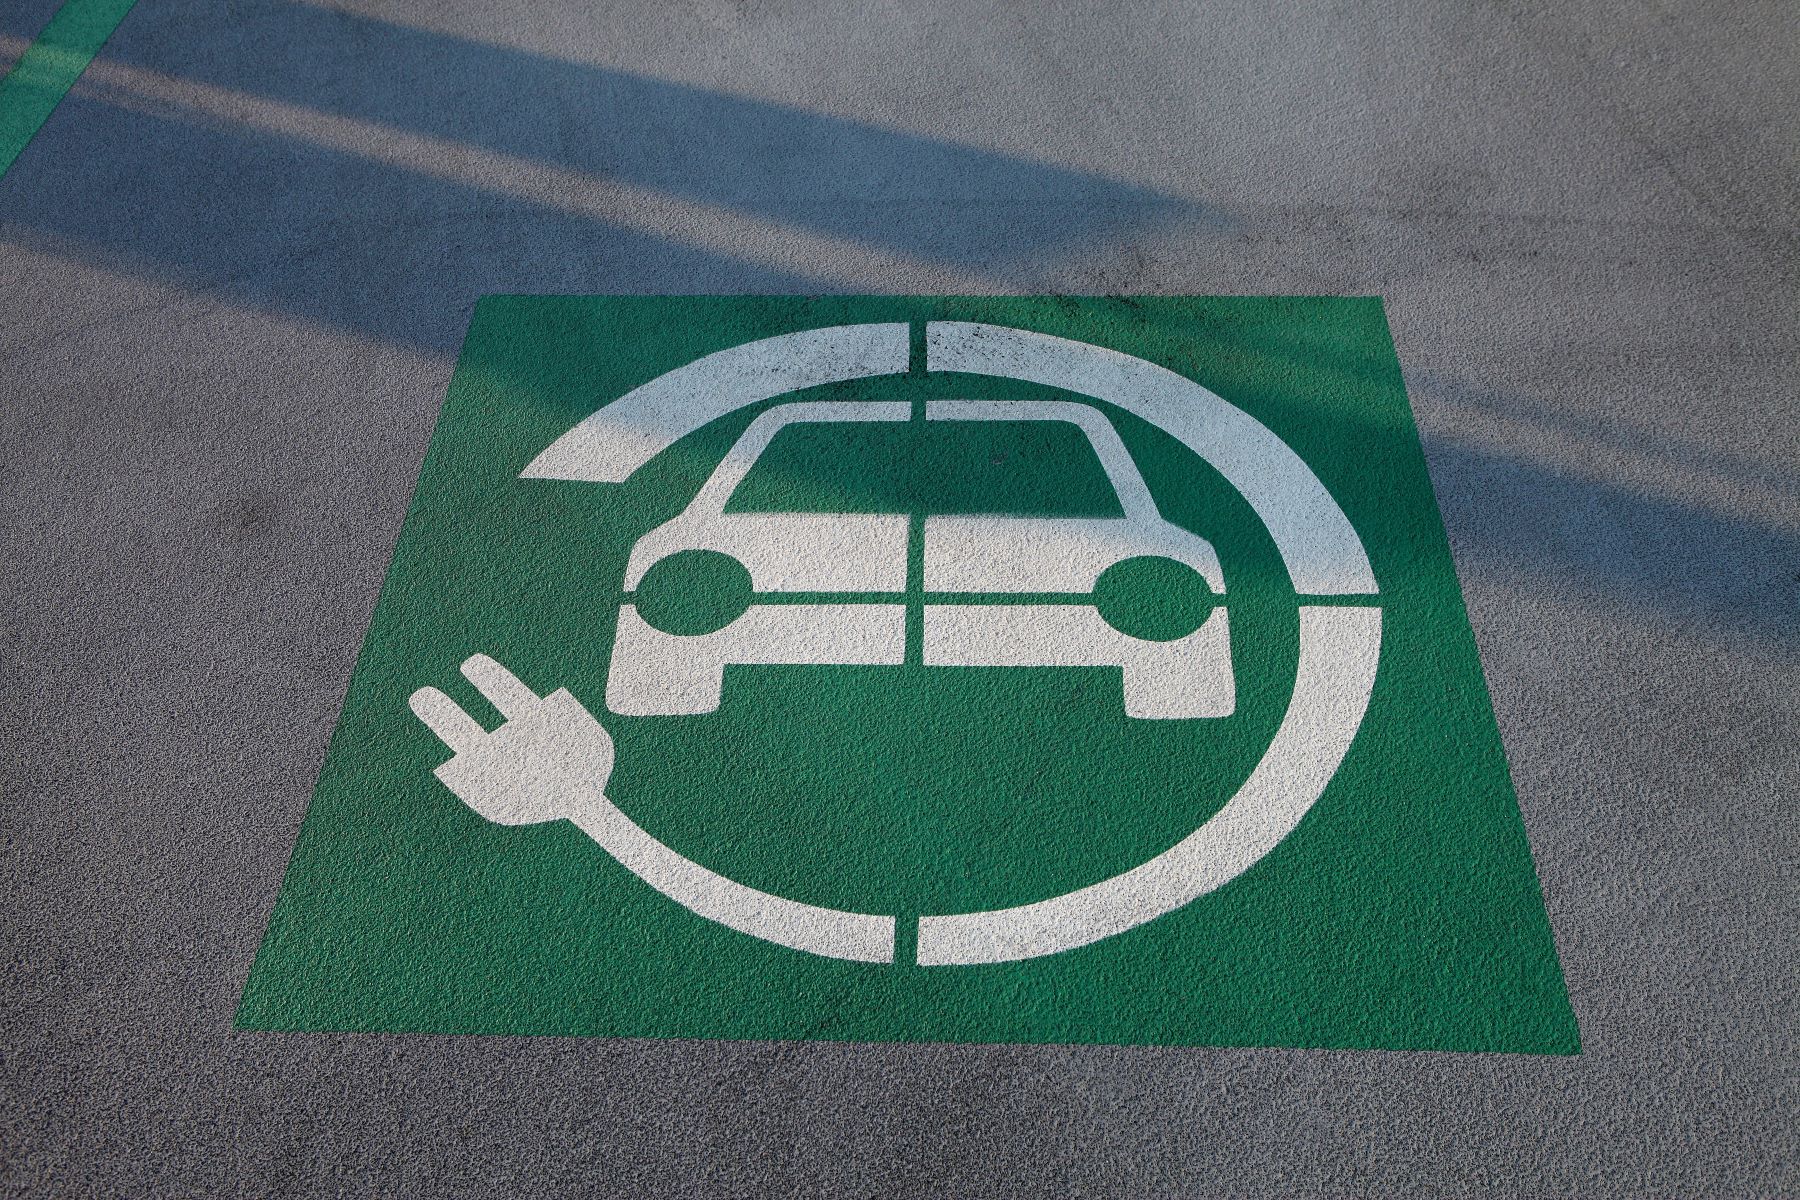 EV charging station signage in the southern state of Atlanta, Georgia